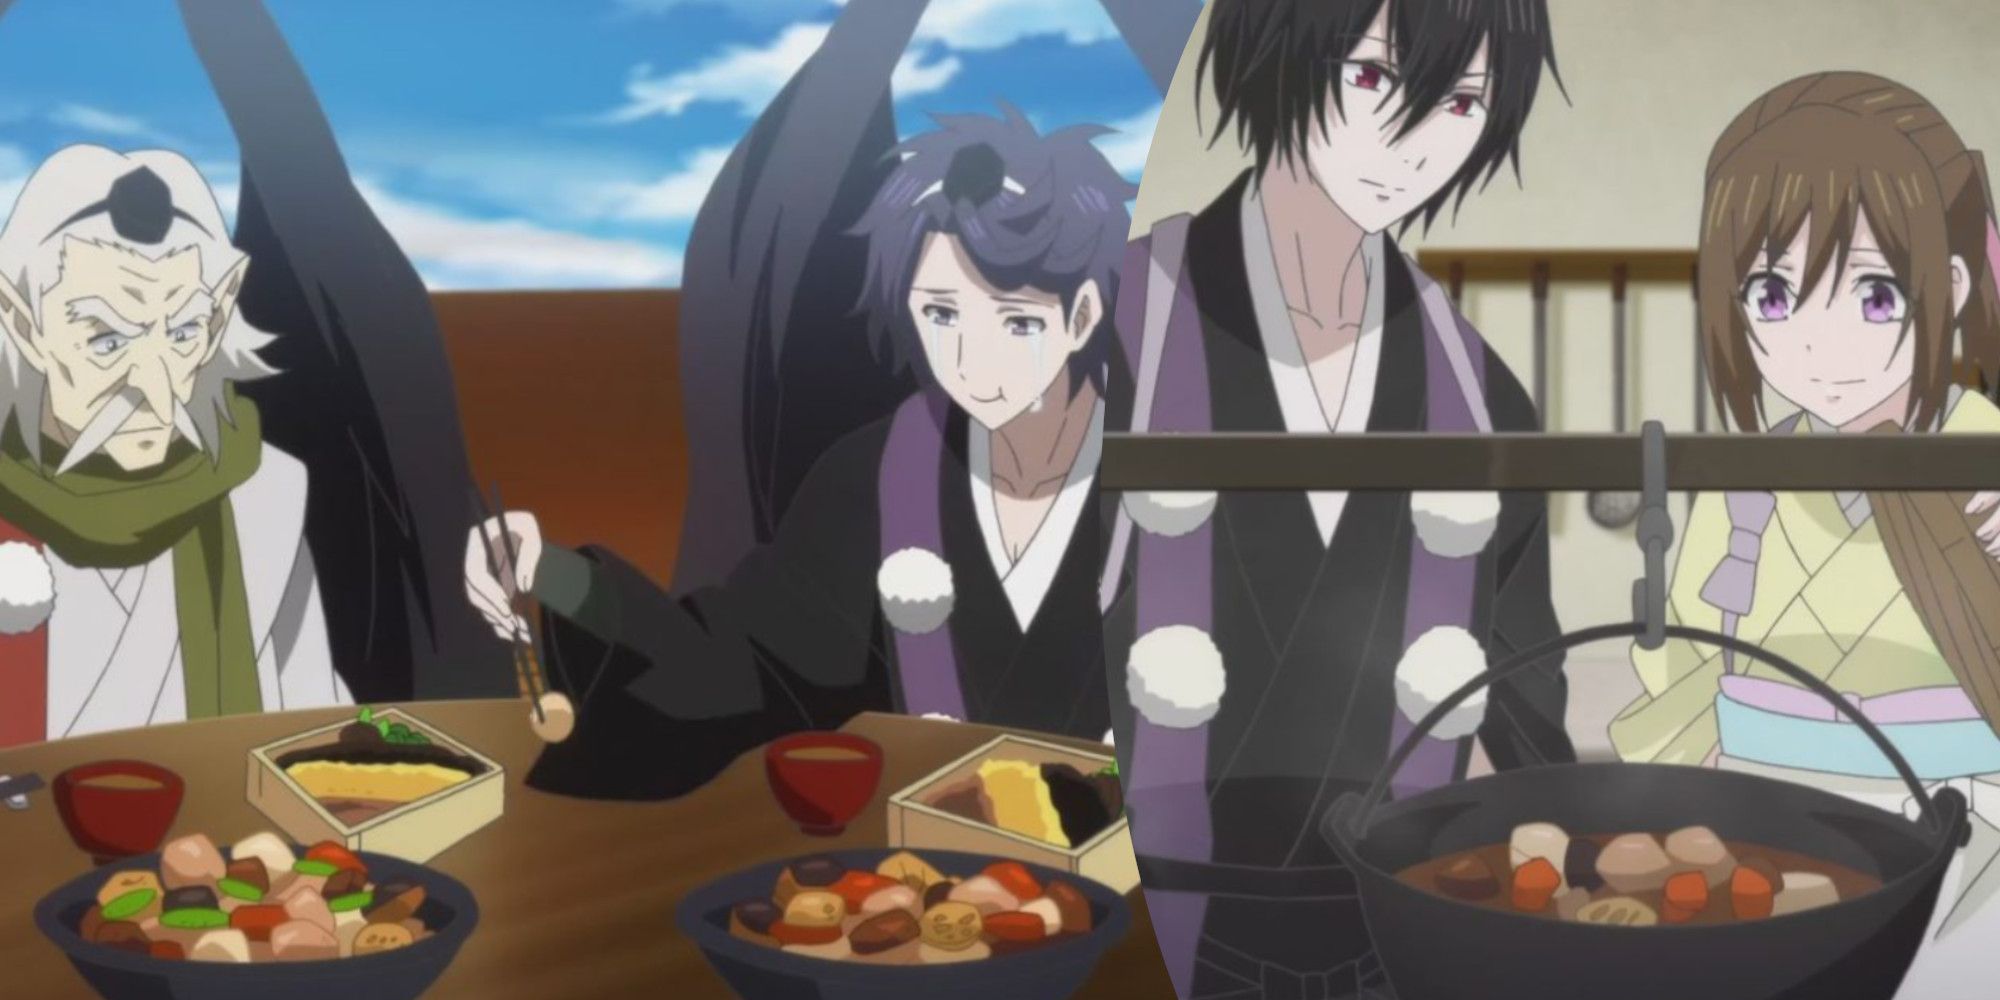 A split image of Kakuriyo: Bed & Breakfast for Spirits characters sharing a meal